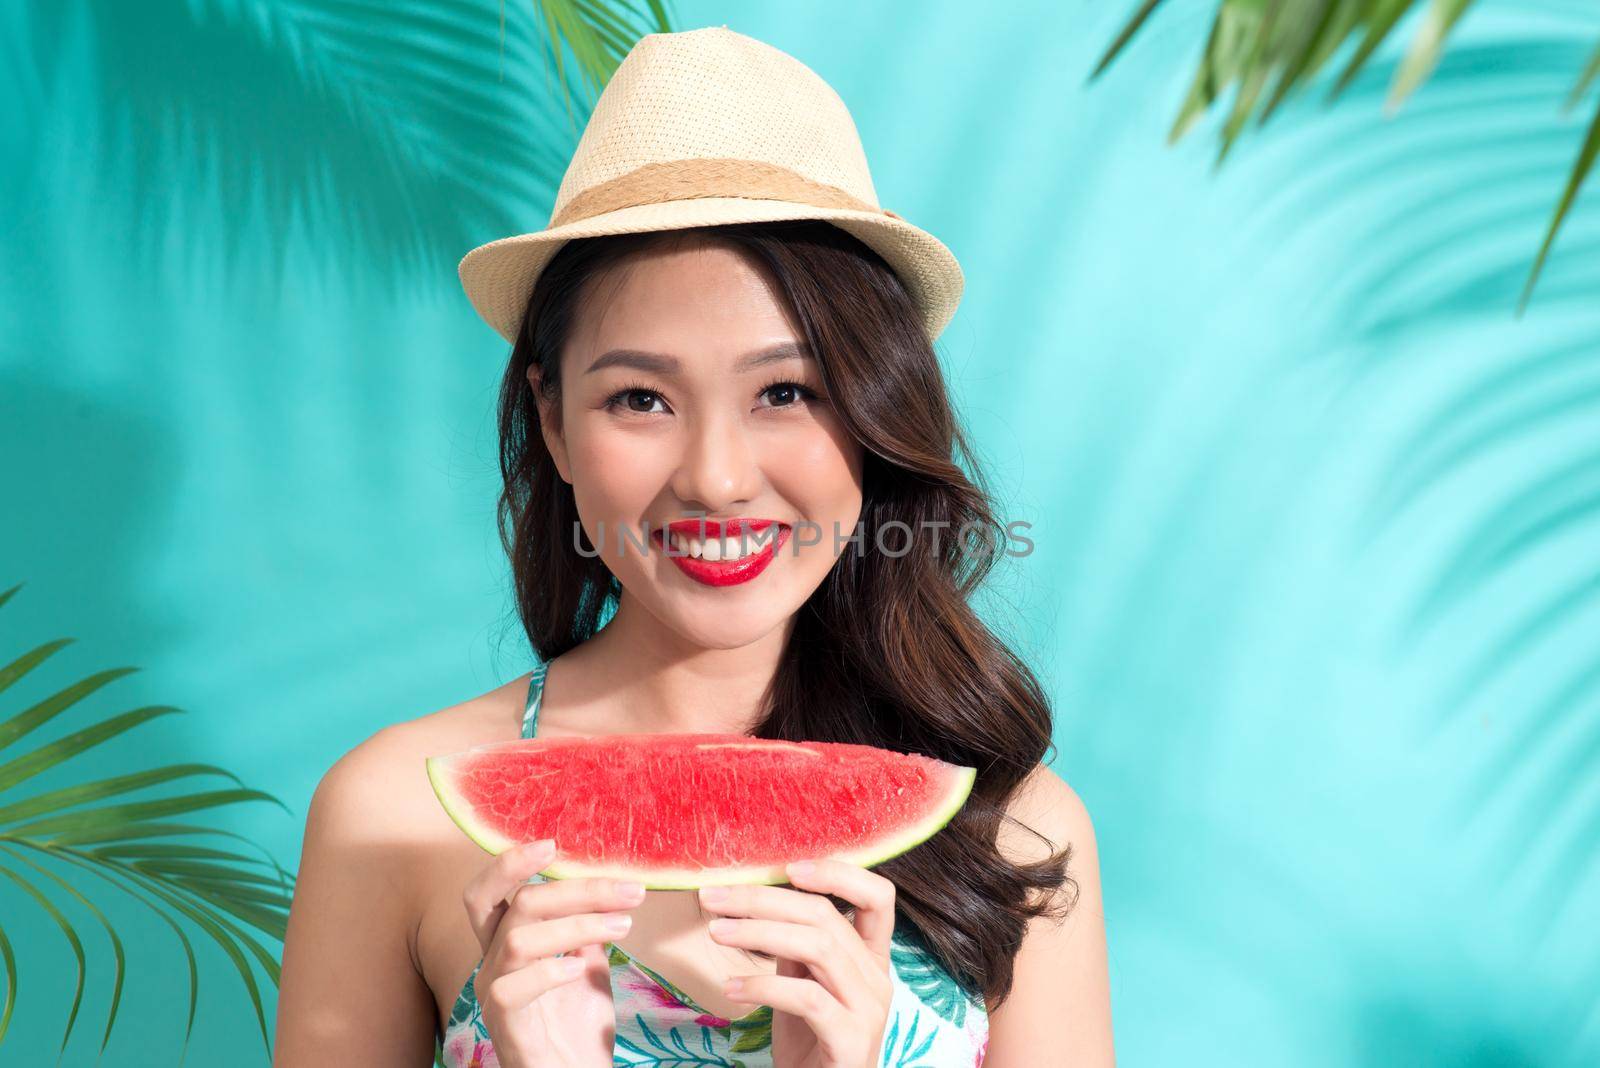 Beautiful girl with red lips eating watermelon. by makidotvn